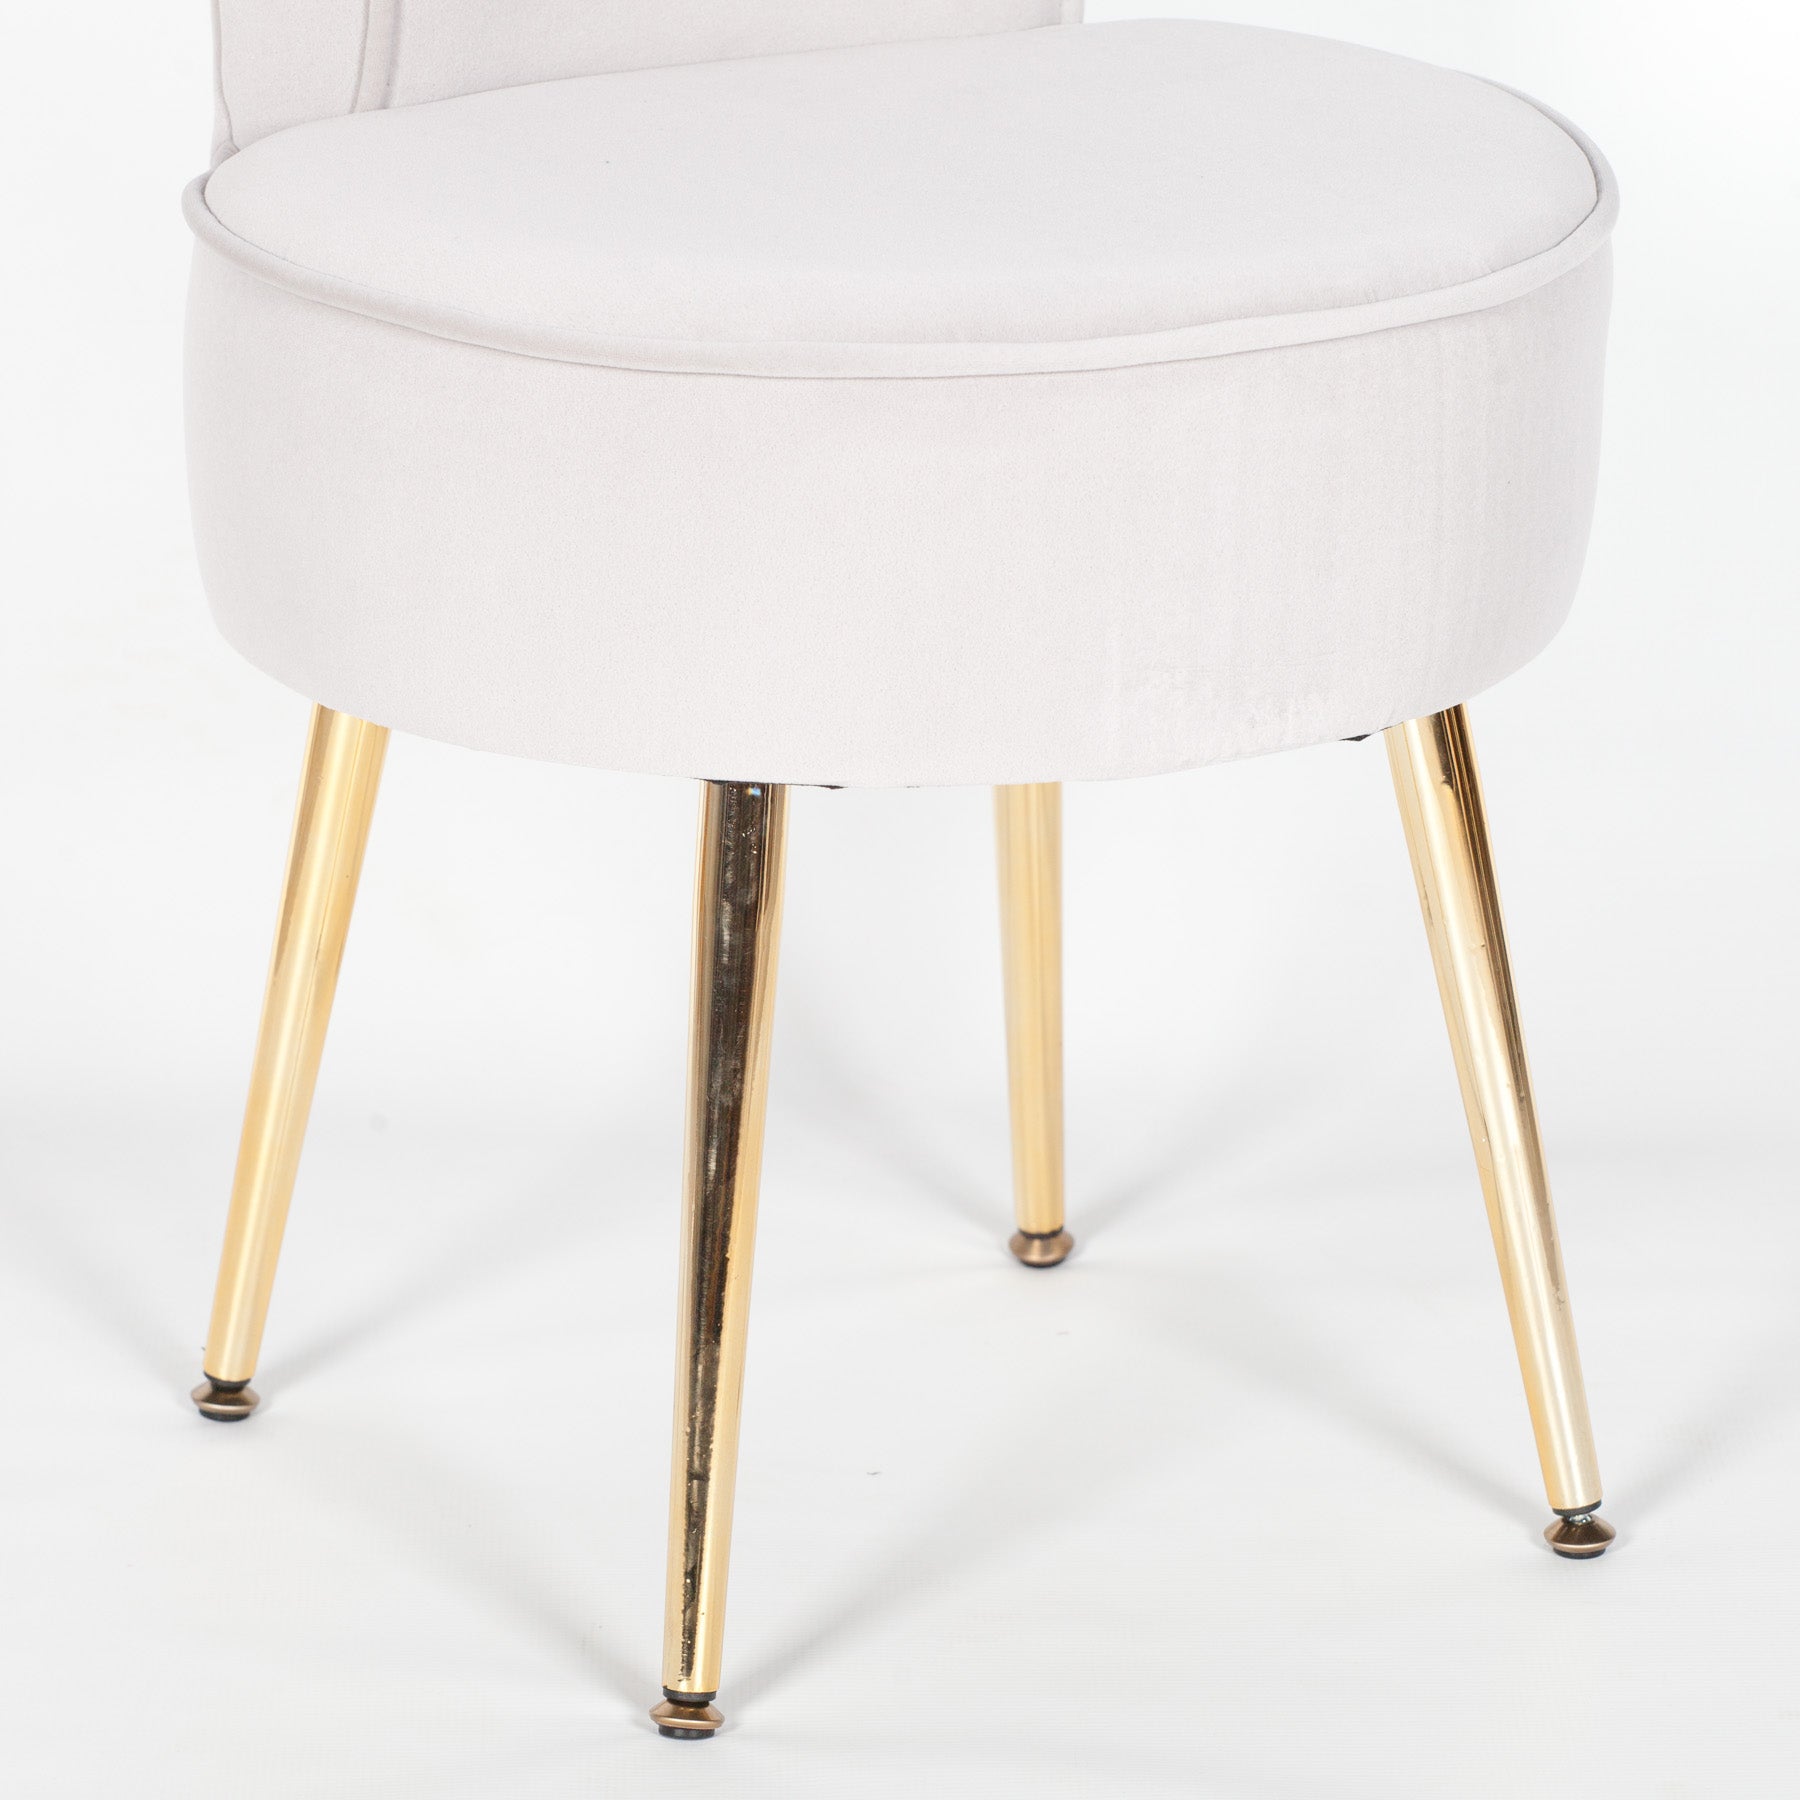 Grey Stool / Bedroom Chair with Gold Legs CasaFenix